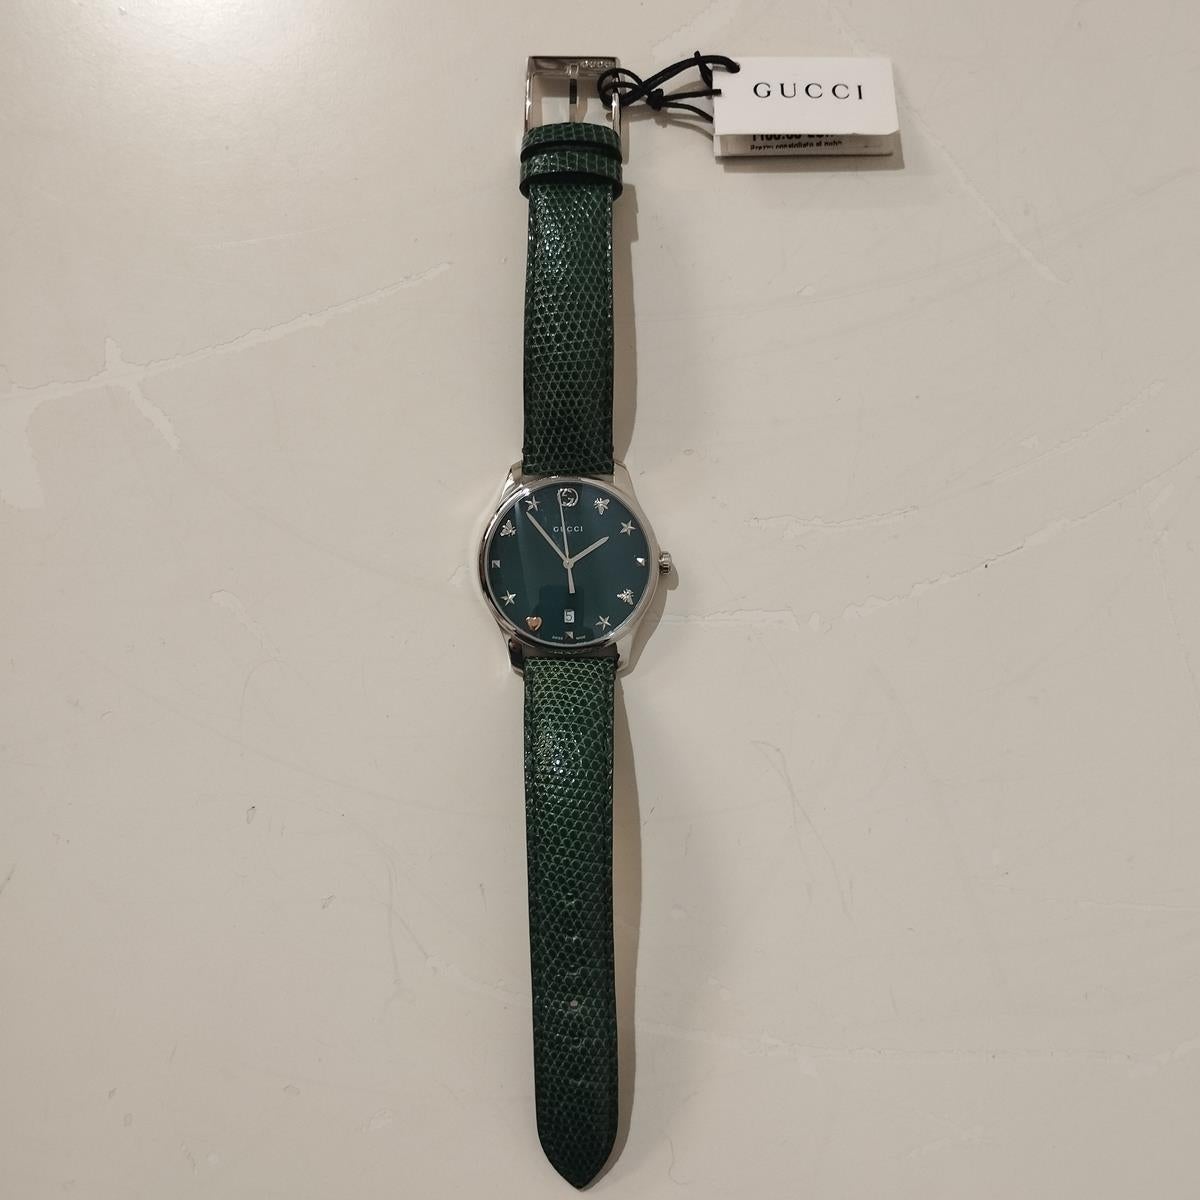 Beautiful and brand new Gucci watch
Timeless Watch
YA126585
Steel 
Green mother of pearl dial
Glass
Quartz mechanism (brand new battery)
Water resistant
Case 29 mm
Green lizard printed leather bracelet 
With box
Original price € 980
Worldwide